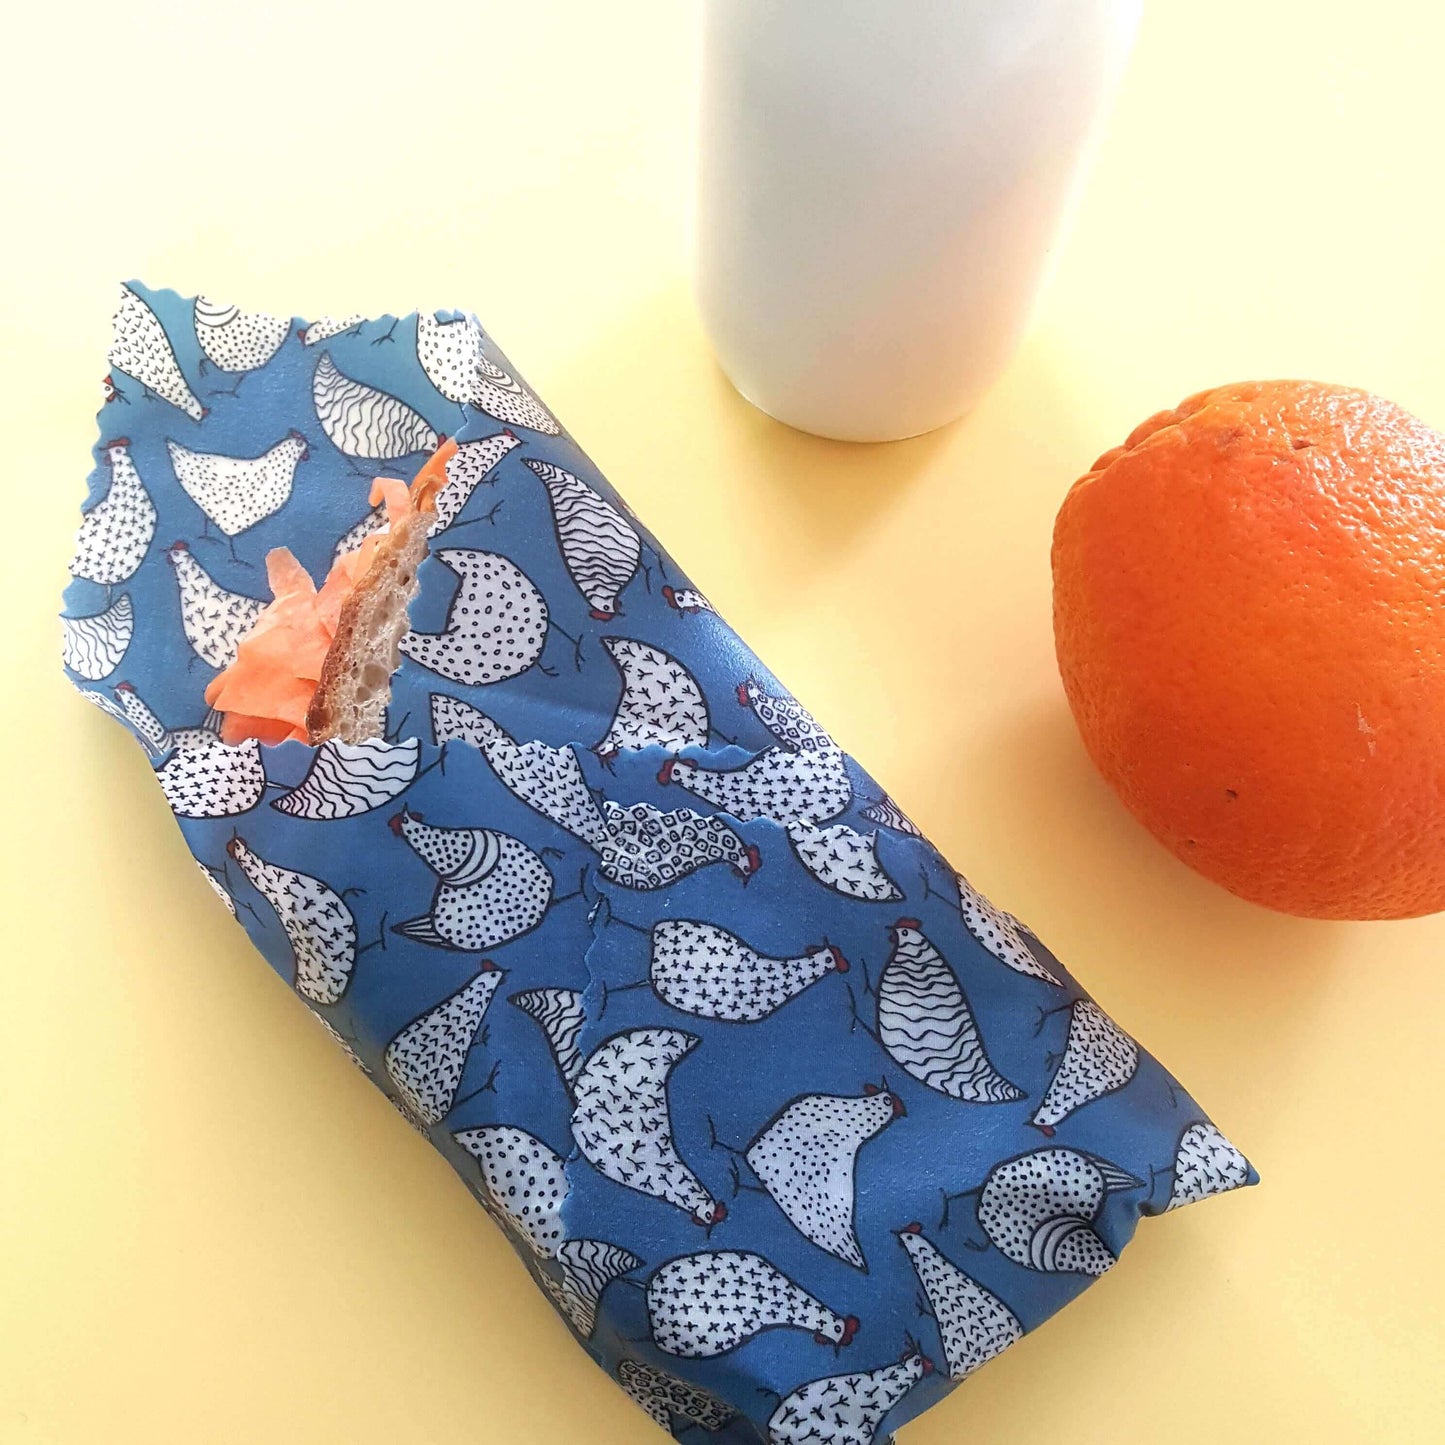 Reusable Beeswax Food Wraps 100% Hand Made in the UK by Honey Bee Good. Planet-Kind single large beeswax wrap in Blue Hens pattern as flatlay